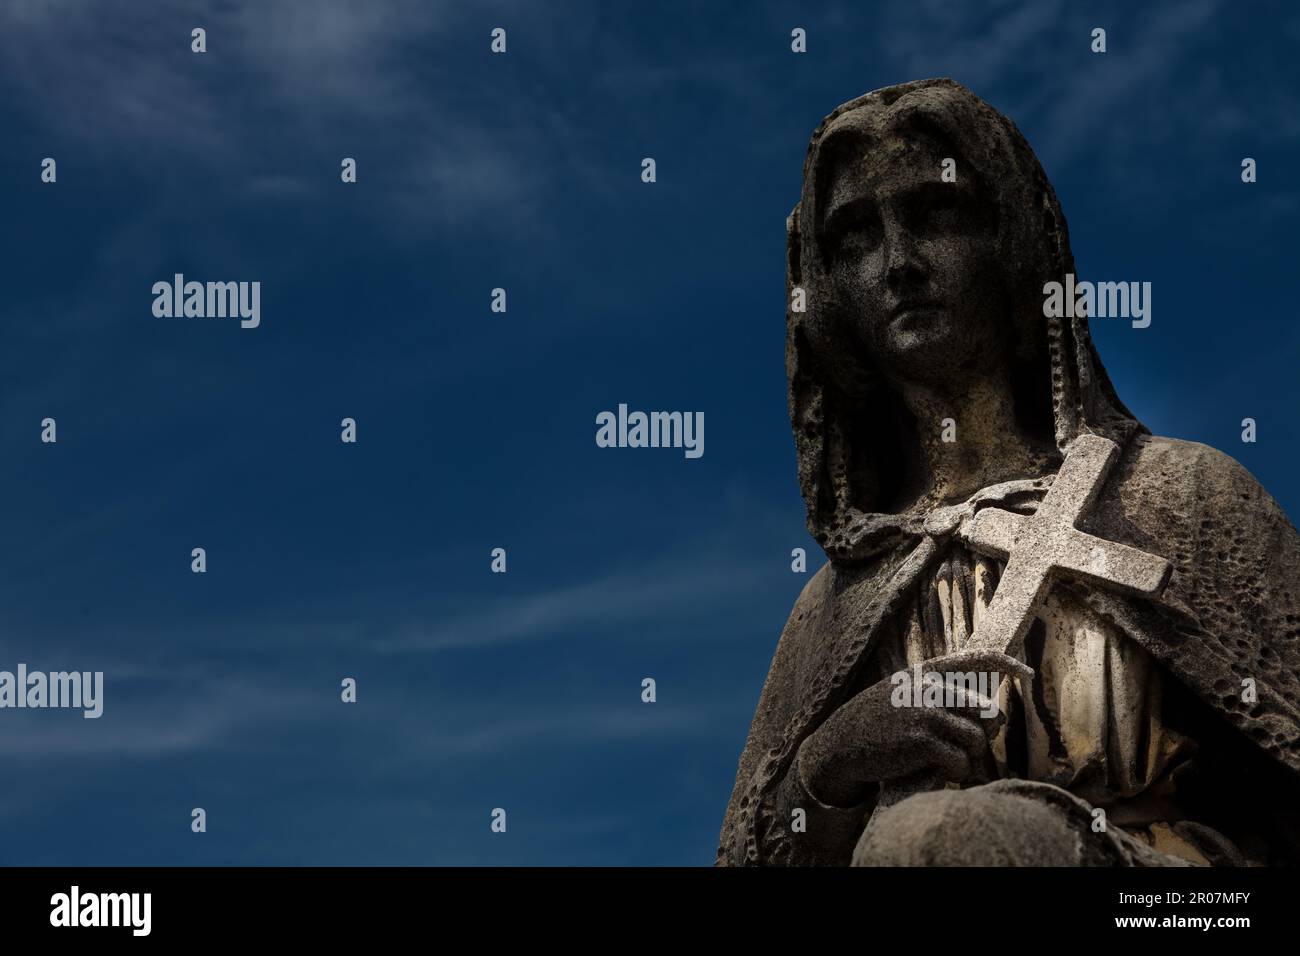 Cemetery statue in Italy, made of stone - more than 100 years old Stock Photo